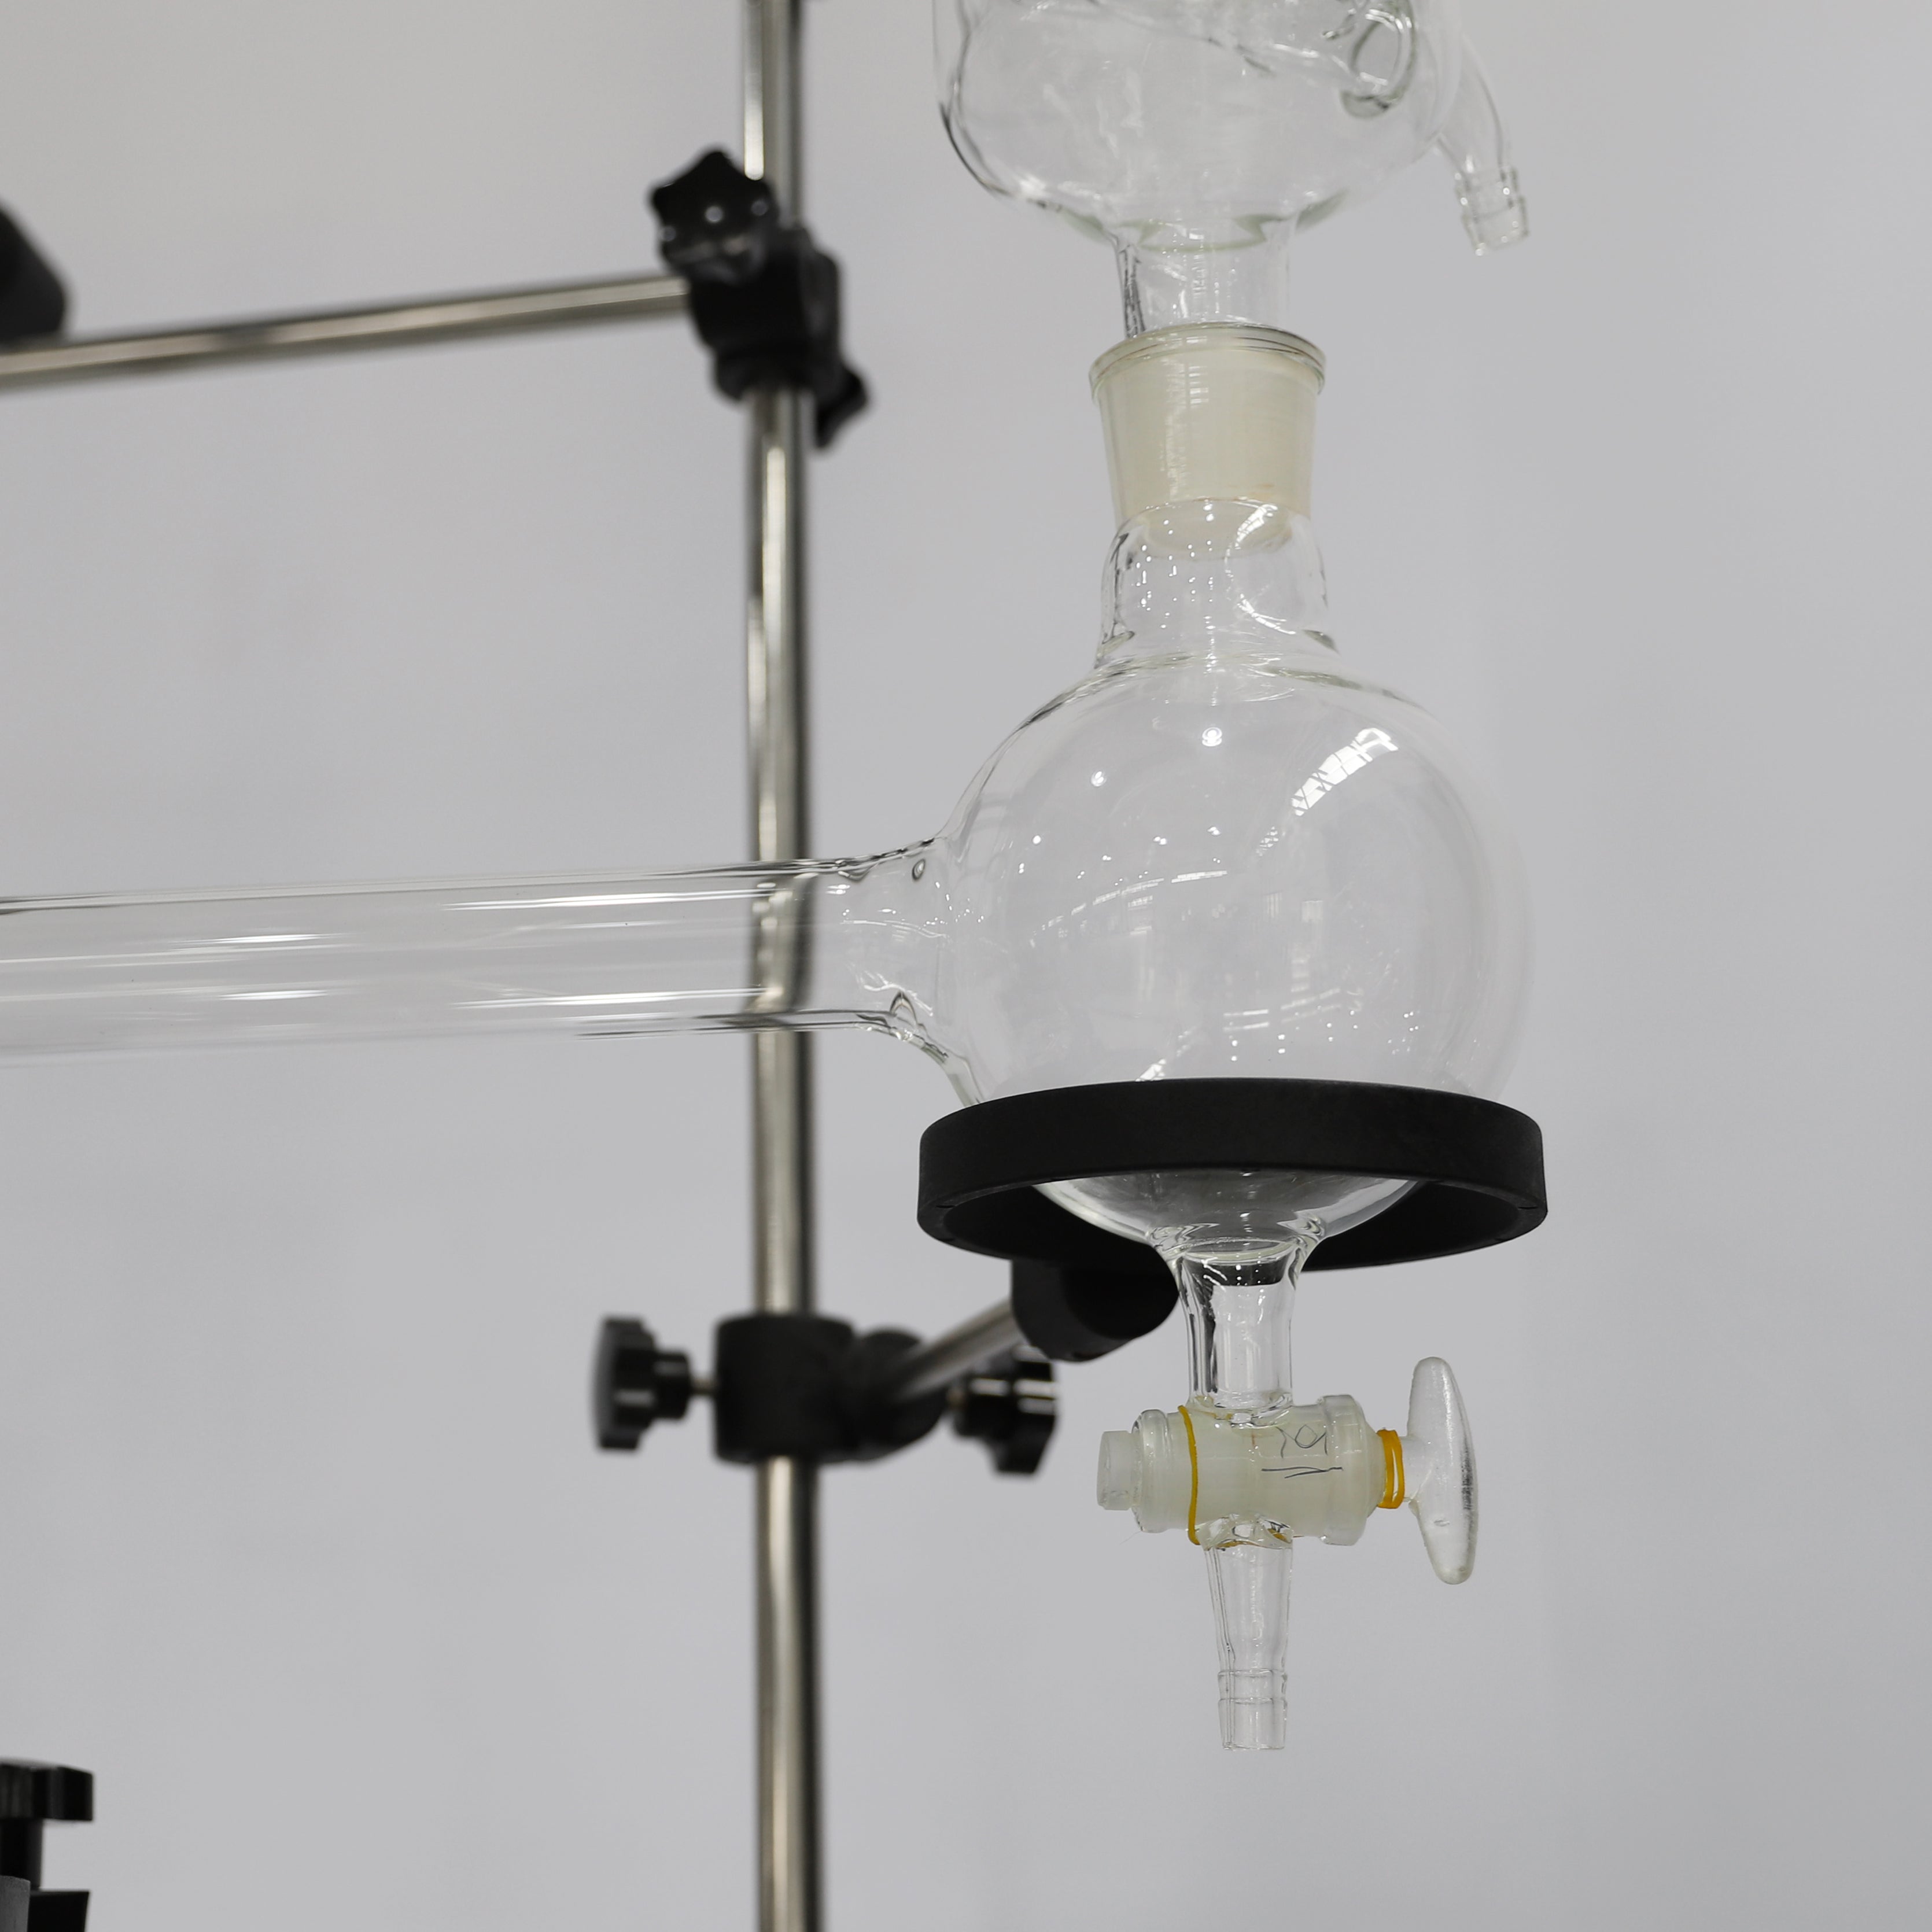 10L Chemical Lab Jacketed Glass Reactor Vessel Detail